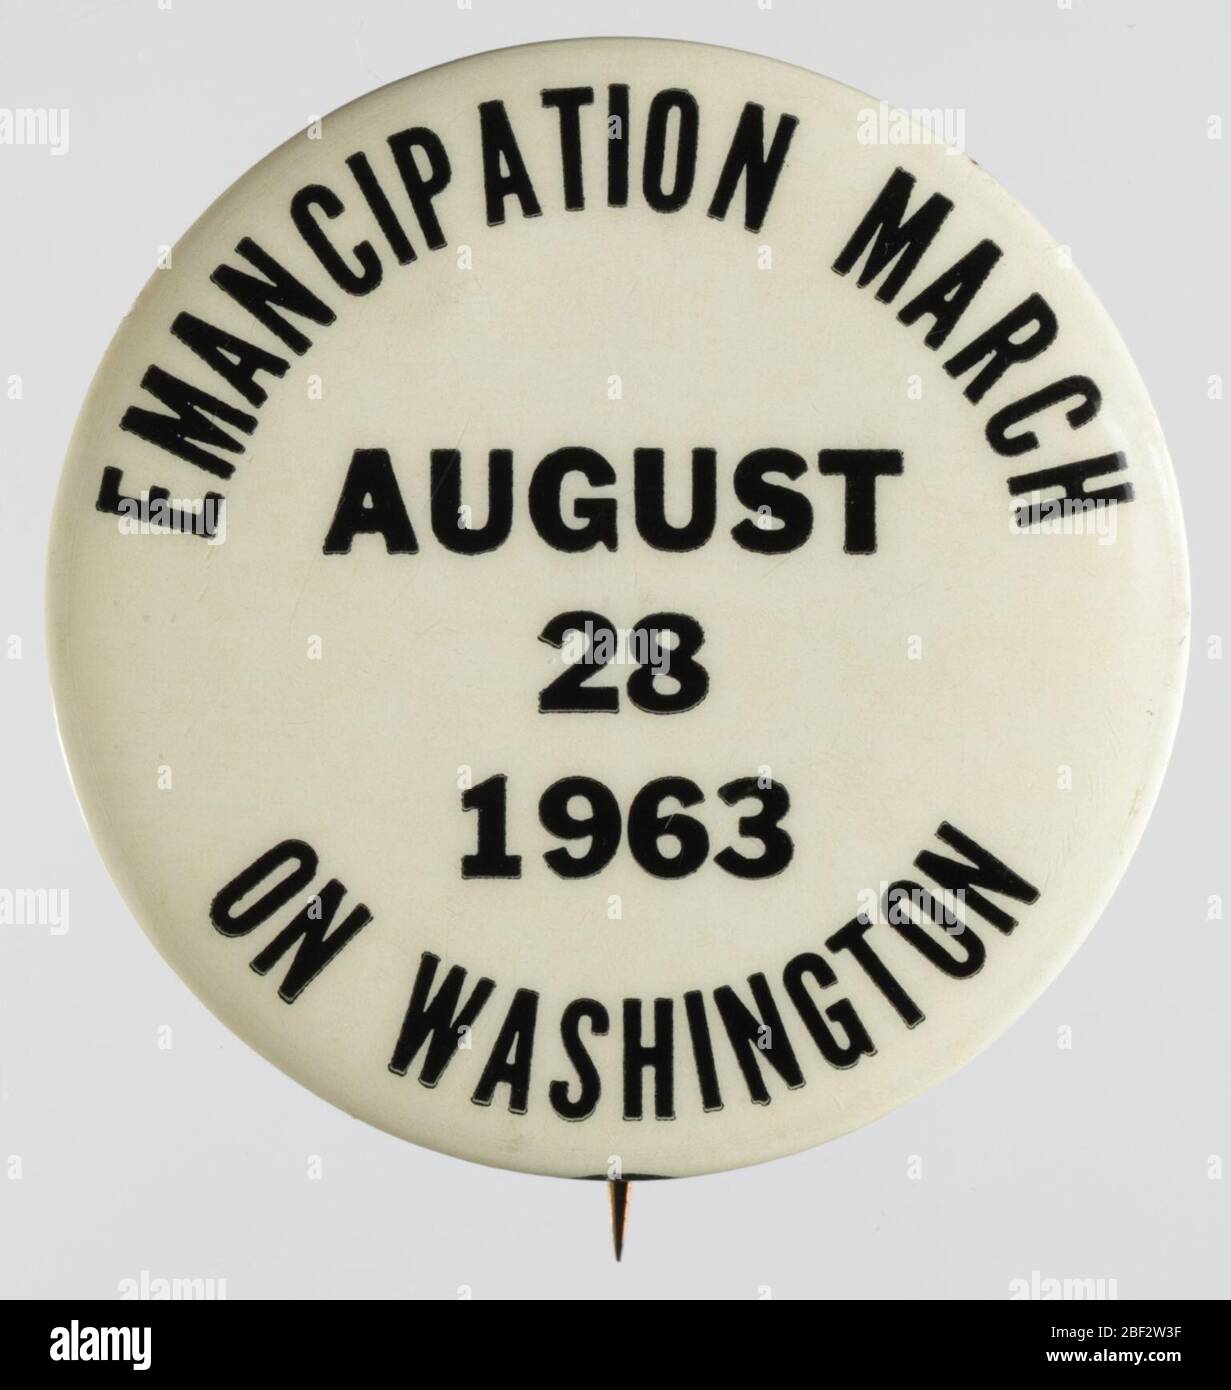 Pinback button for the 1963 March on Washington. A white pin-back button with black text. Around the edges of the front, on the top and bottom, is text surrounding more inner text. Inside the outside circle of text is the date for the March on Washington in 1963. [EMANCIPATION MARCH / AUGUST / 28 / 1963 / ON WASHINGTON]. Stock Photo